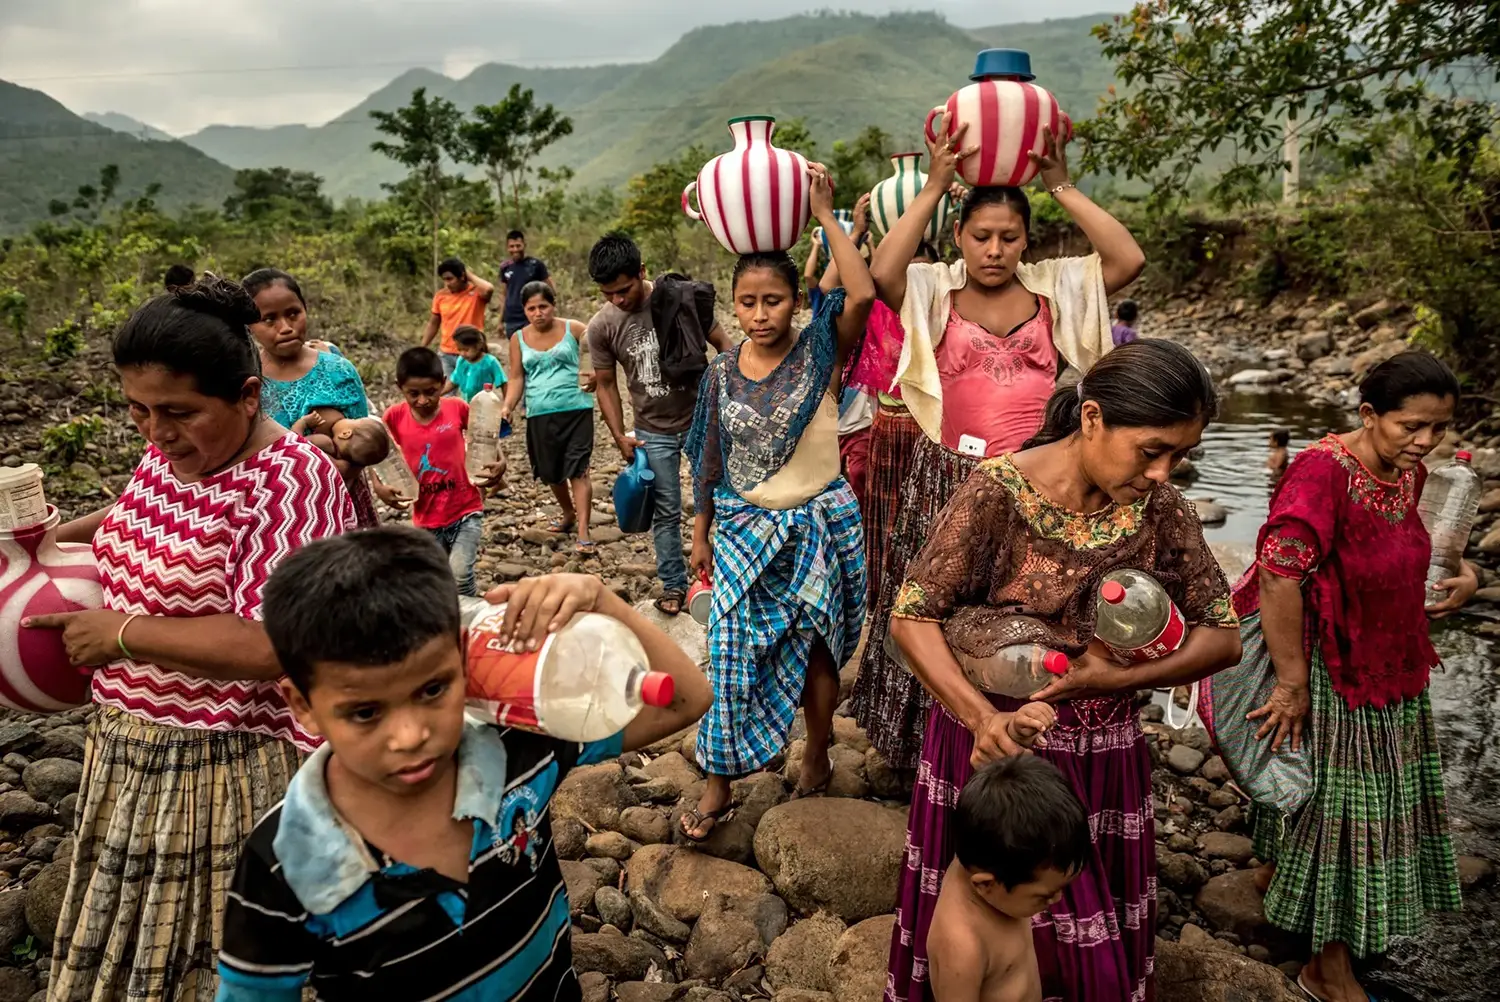 Women and children carry plastic bottles under arm and colorful jugs of water atop their heads. They are standing atop river rocks, and a small stream is visible in the background.